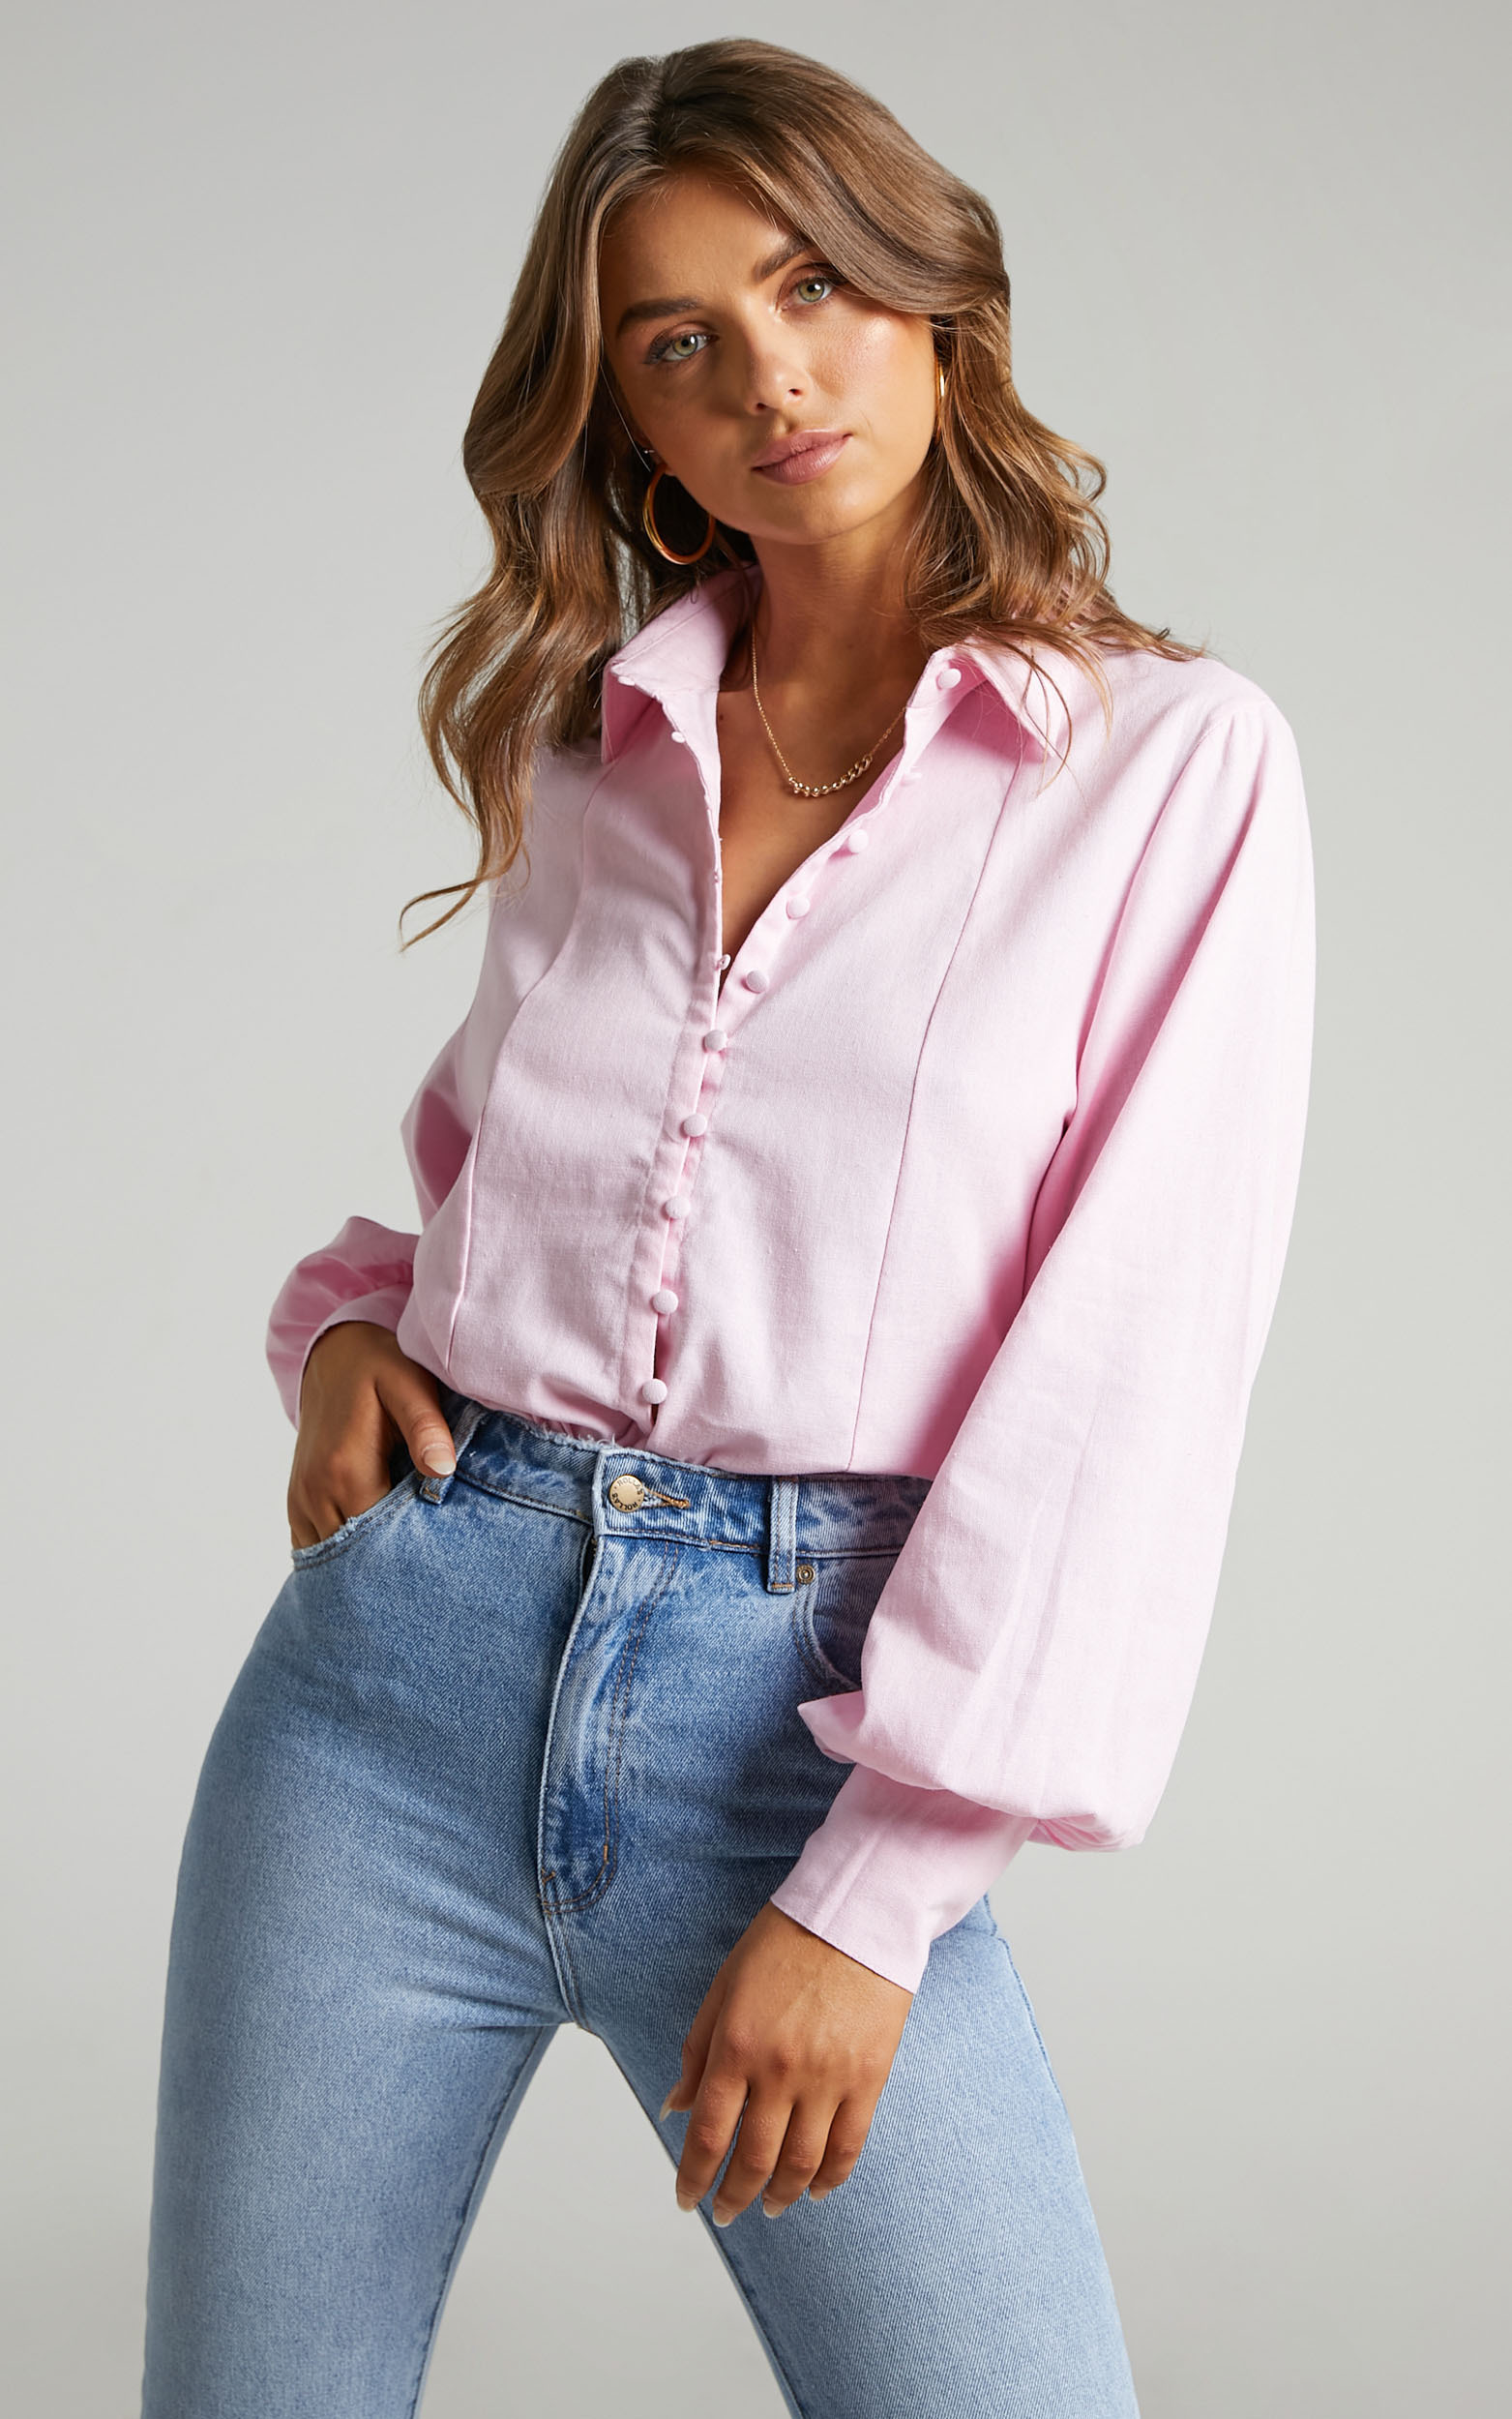 Kiva Blouse in Baby Pink - 06, PNK3, hi-res image number null